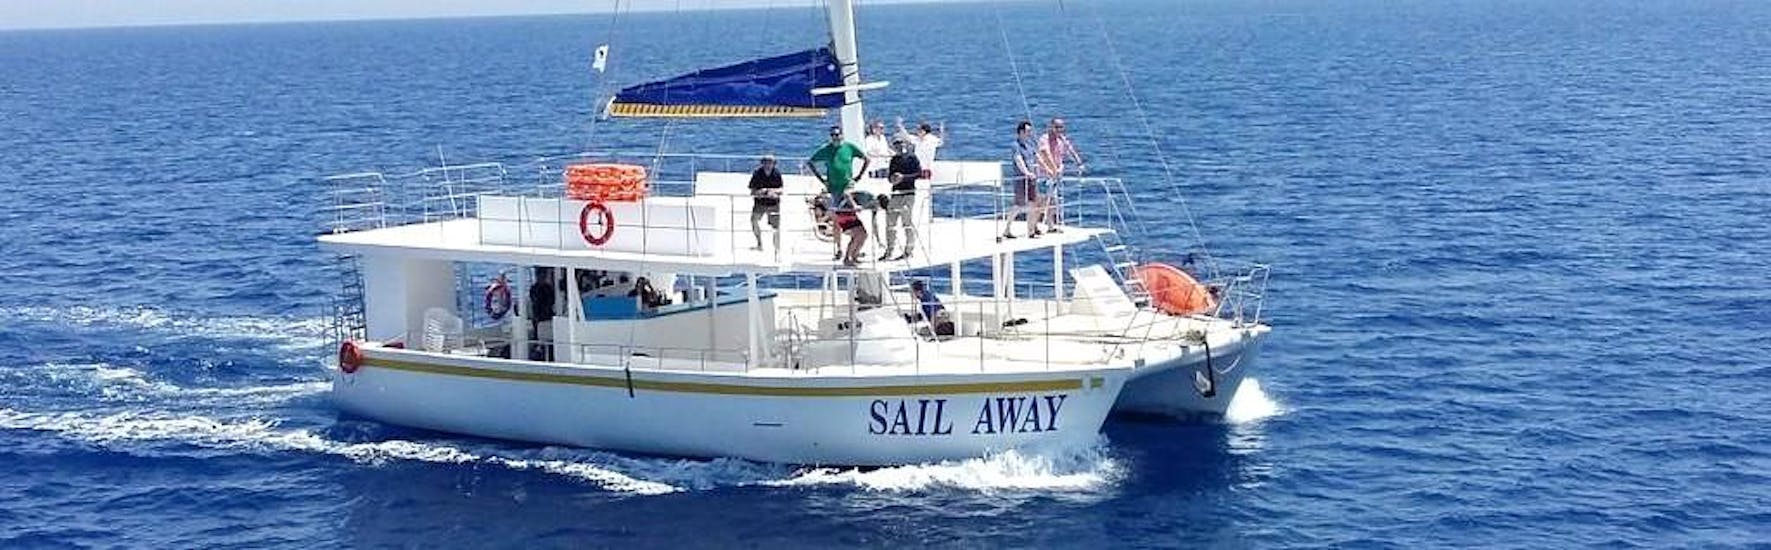 Picture of the Sail Away catamaran used by Relax-Cruises Limassol for the boat trips.